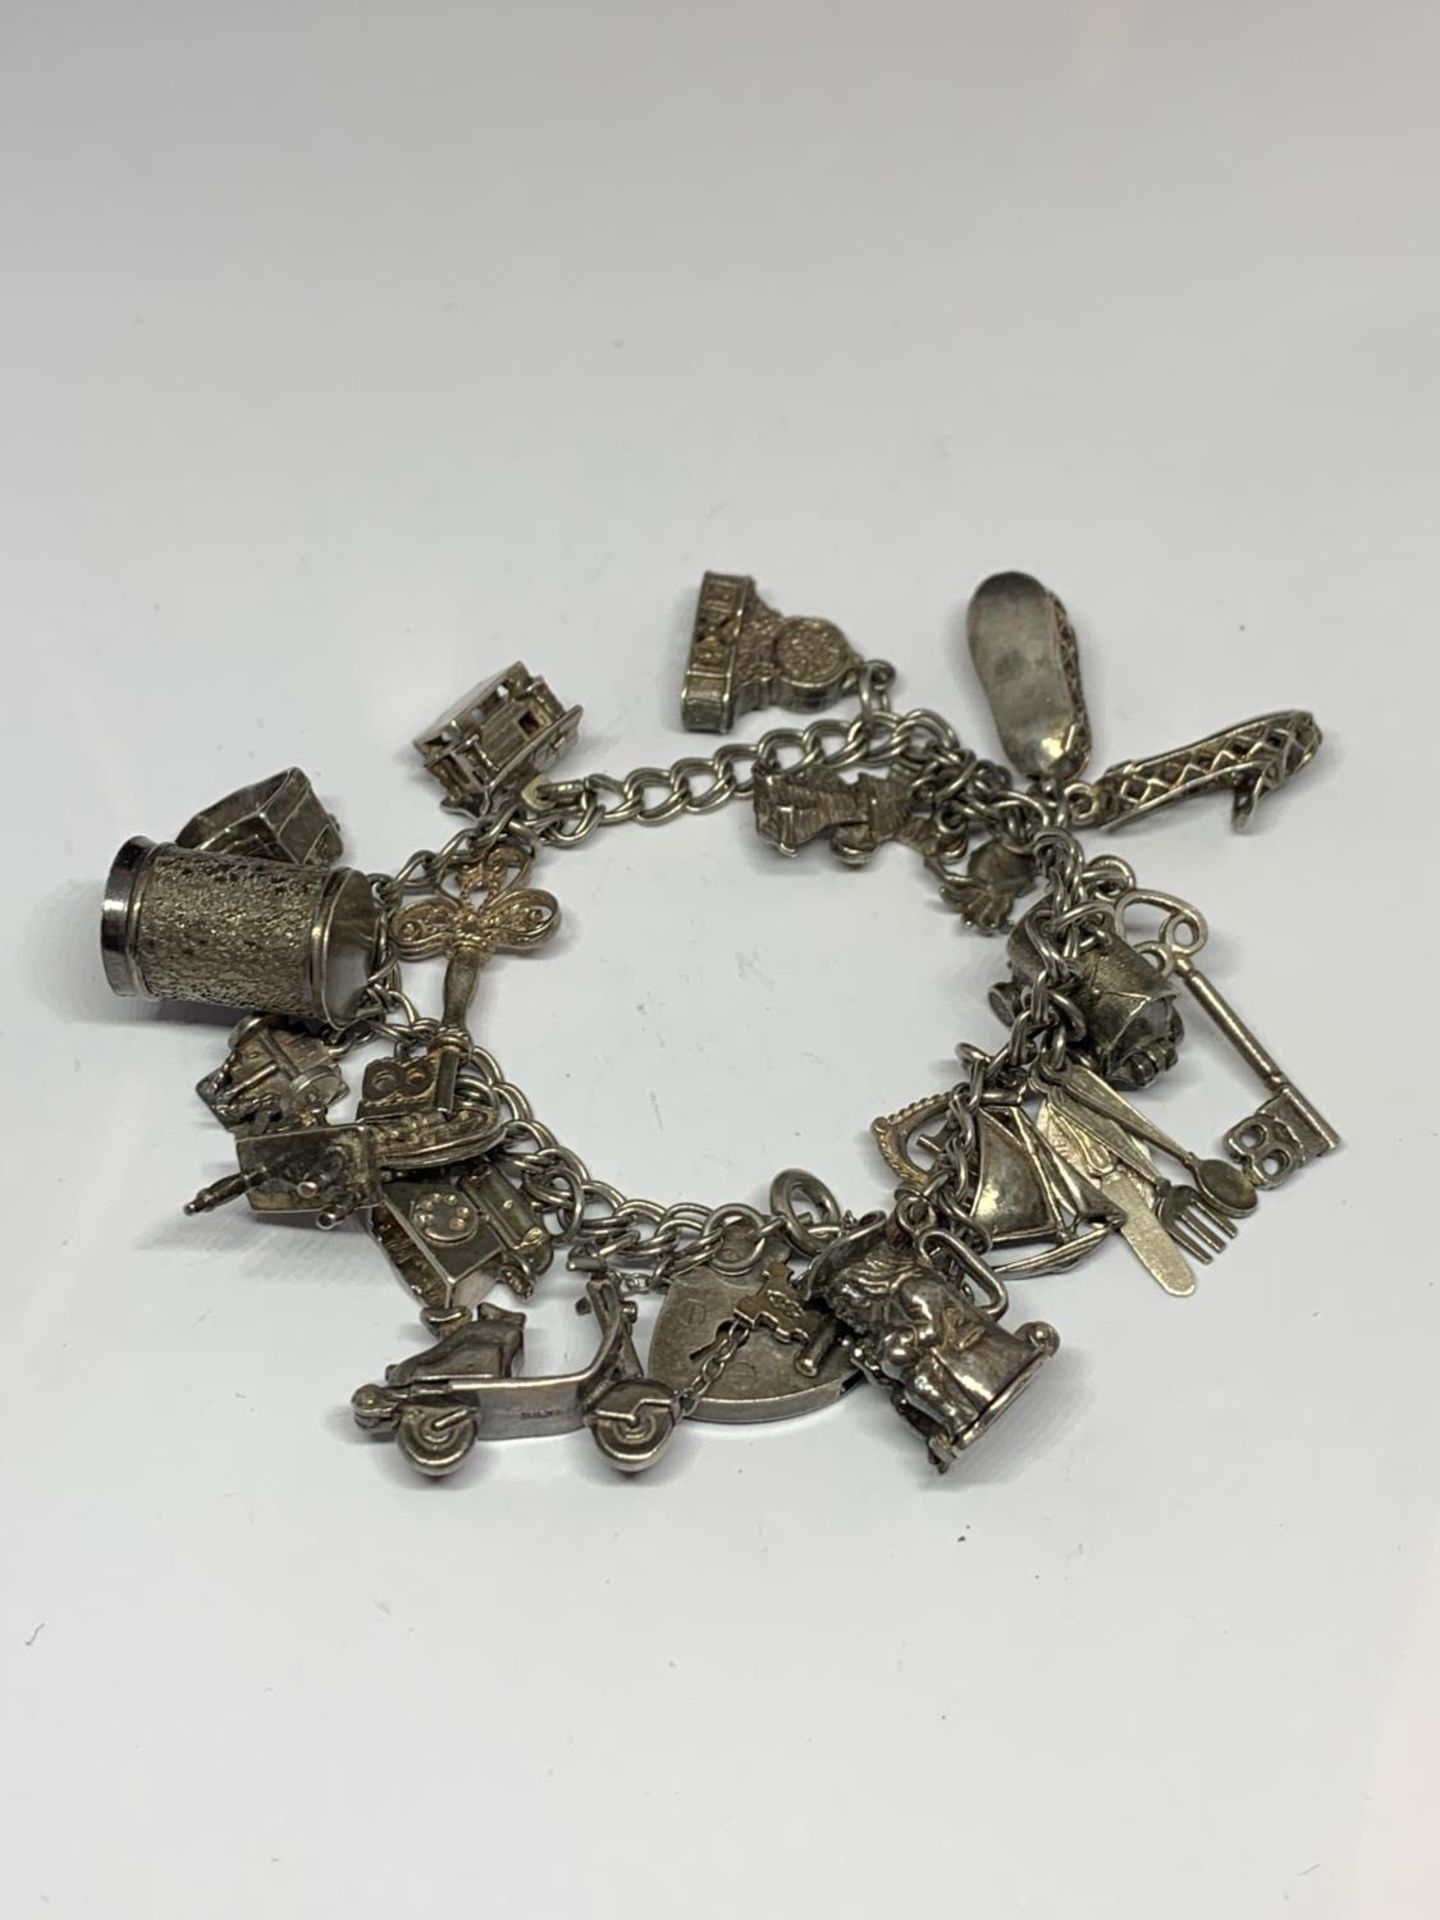 A SILVER CHARM BRACELET WITH EIGHTEEN CHARMS - Image 6 of 6